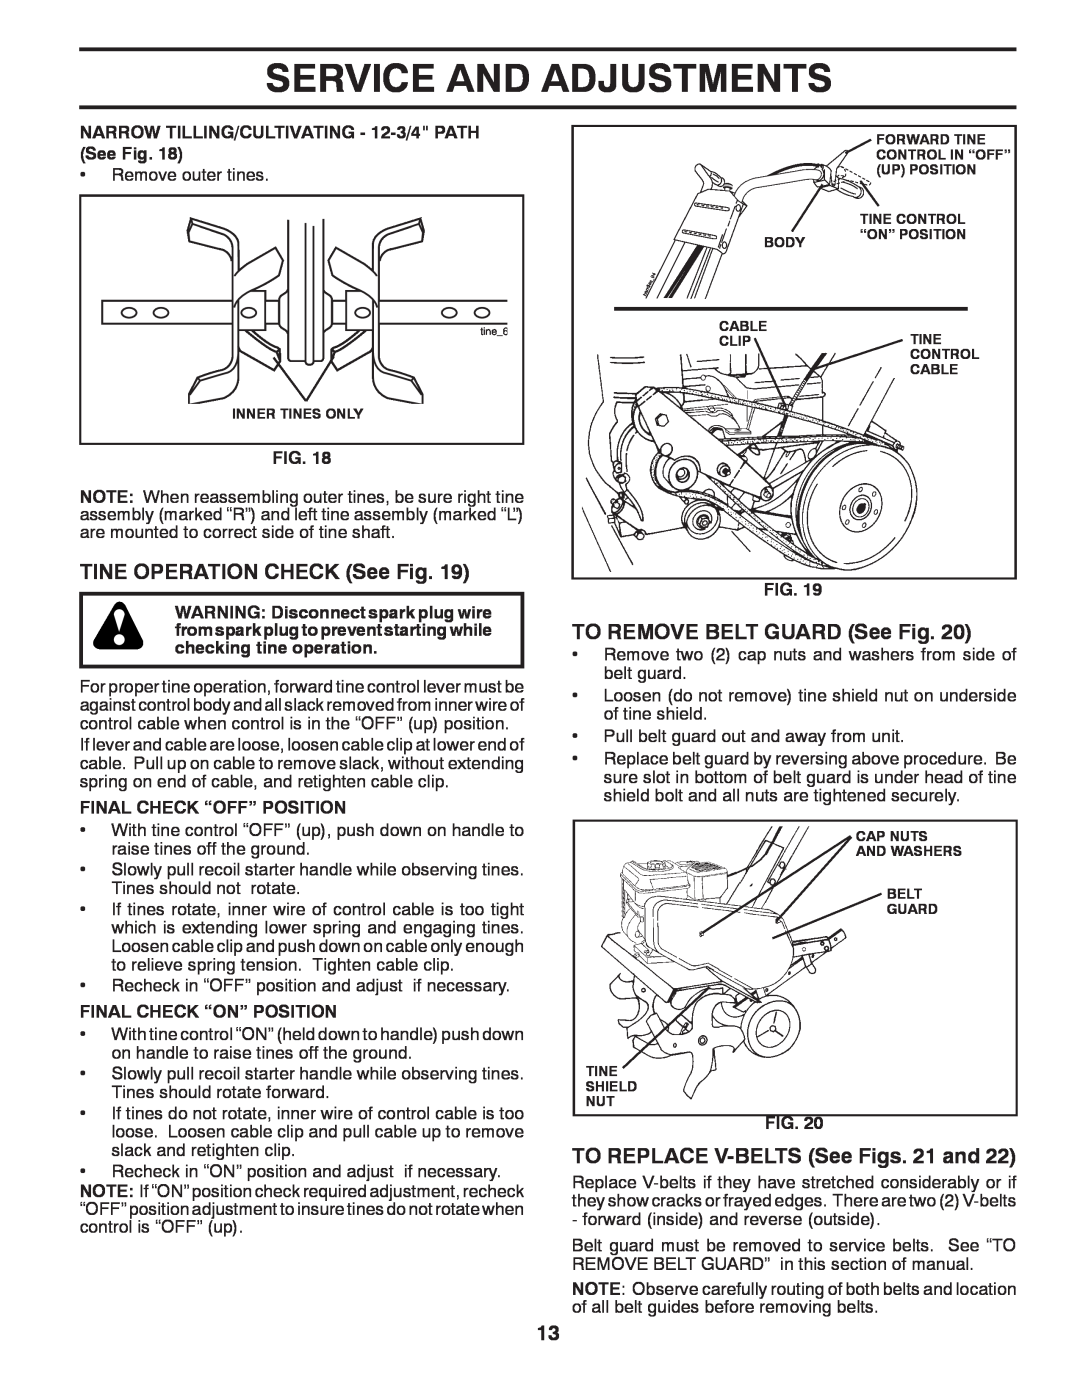 Poulan HDF825X manual TINE OPERATION CHECK See Fig, TO REMOVE BELT GUARD See Fig, TO REPLACE V-BELTSSee Figs. 21 and 